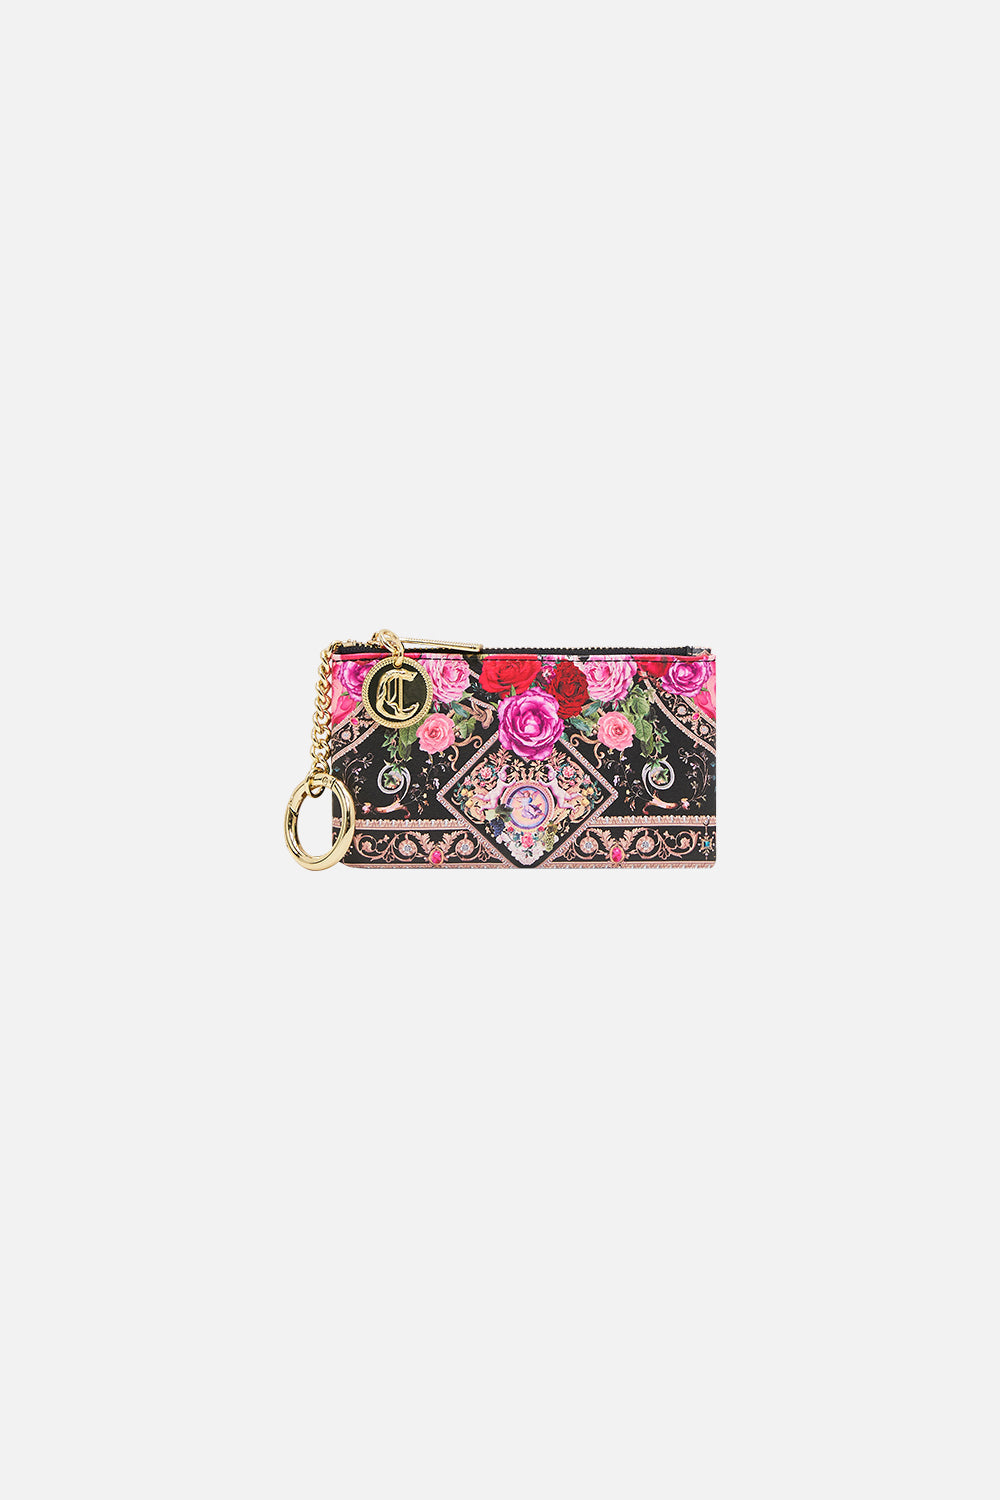 Product view of CAMILLA designer cardholder in Reservation For Love print 